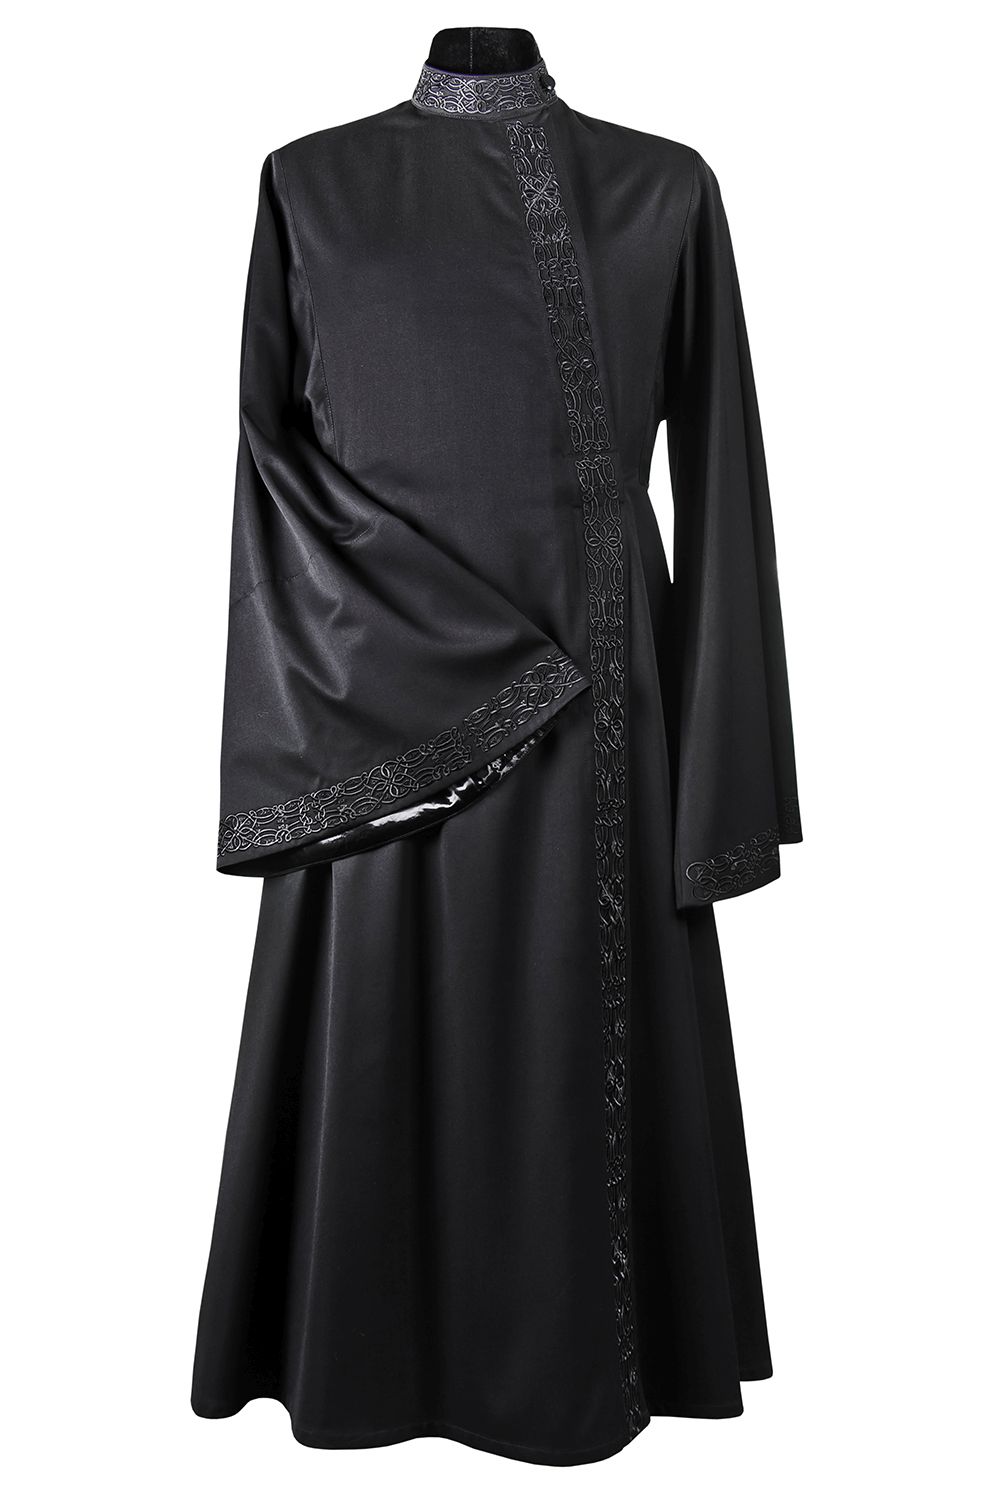 Russian style Men's Outer Cassock